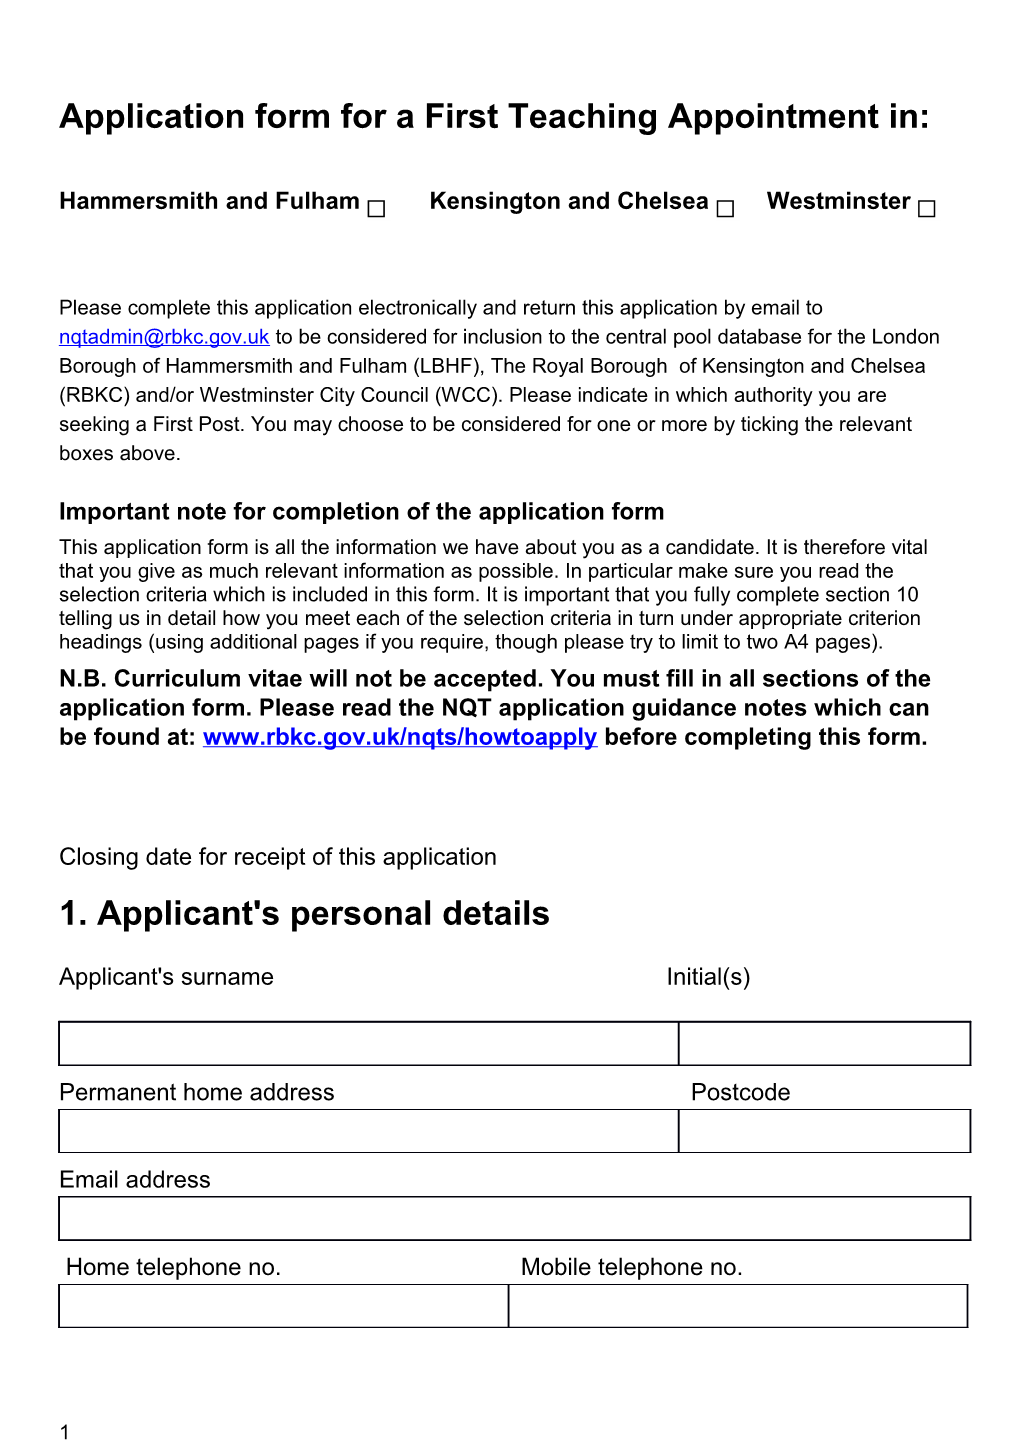 Application Form for a First Teaching Appointment In